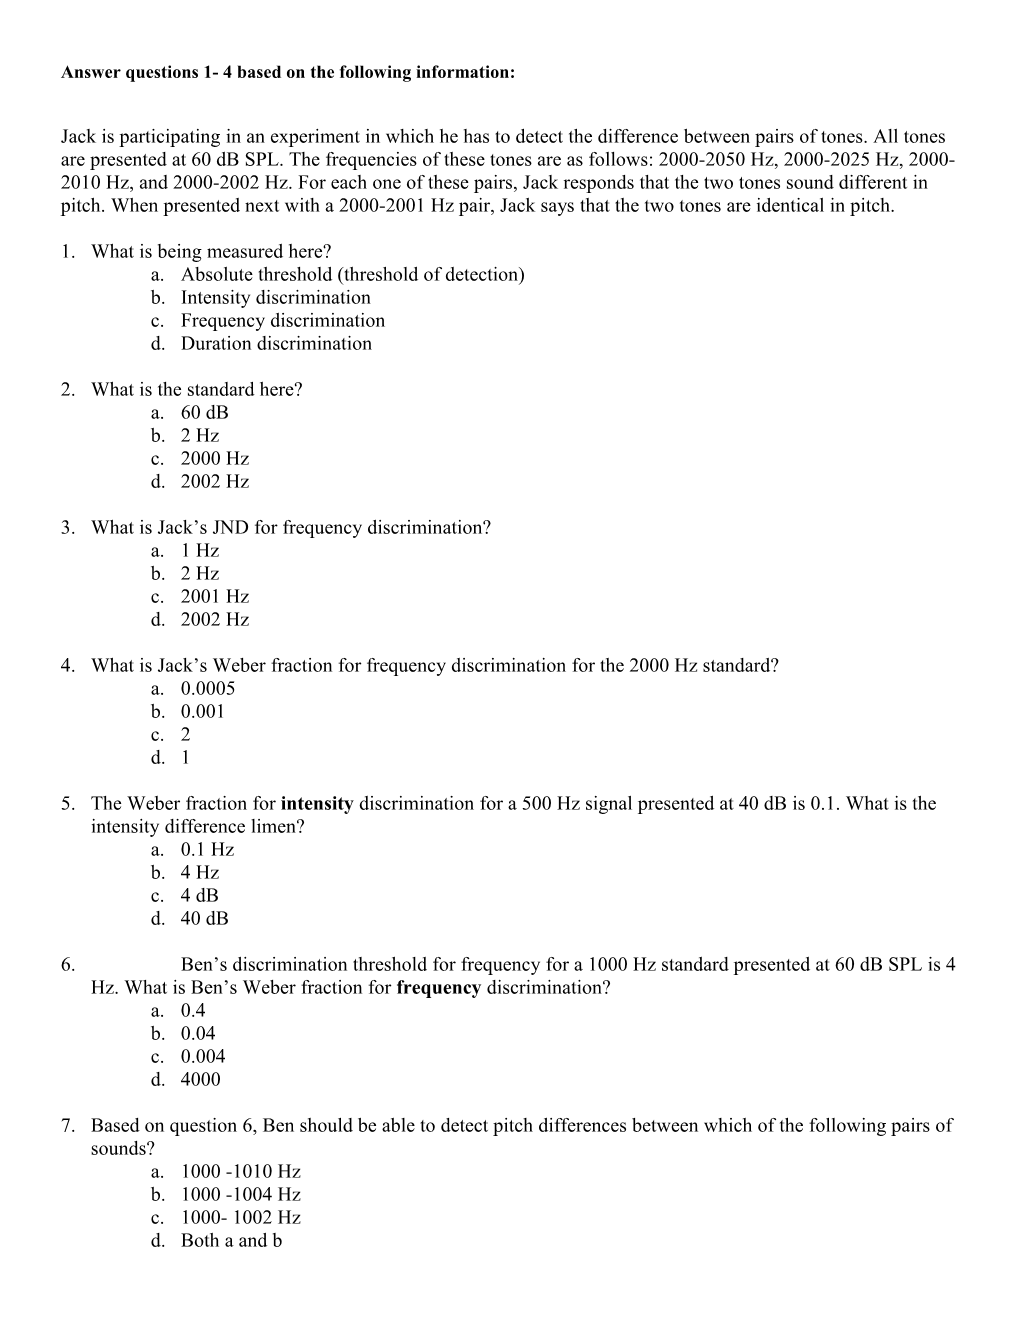 Answer Questions 1- 4 Based on the Following Information